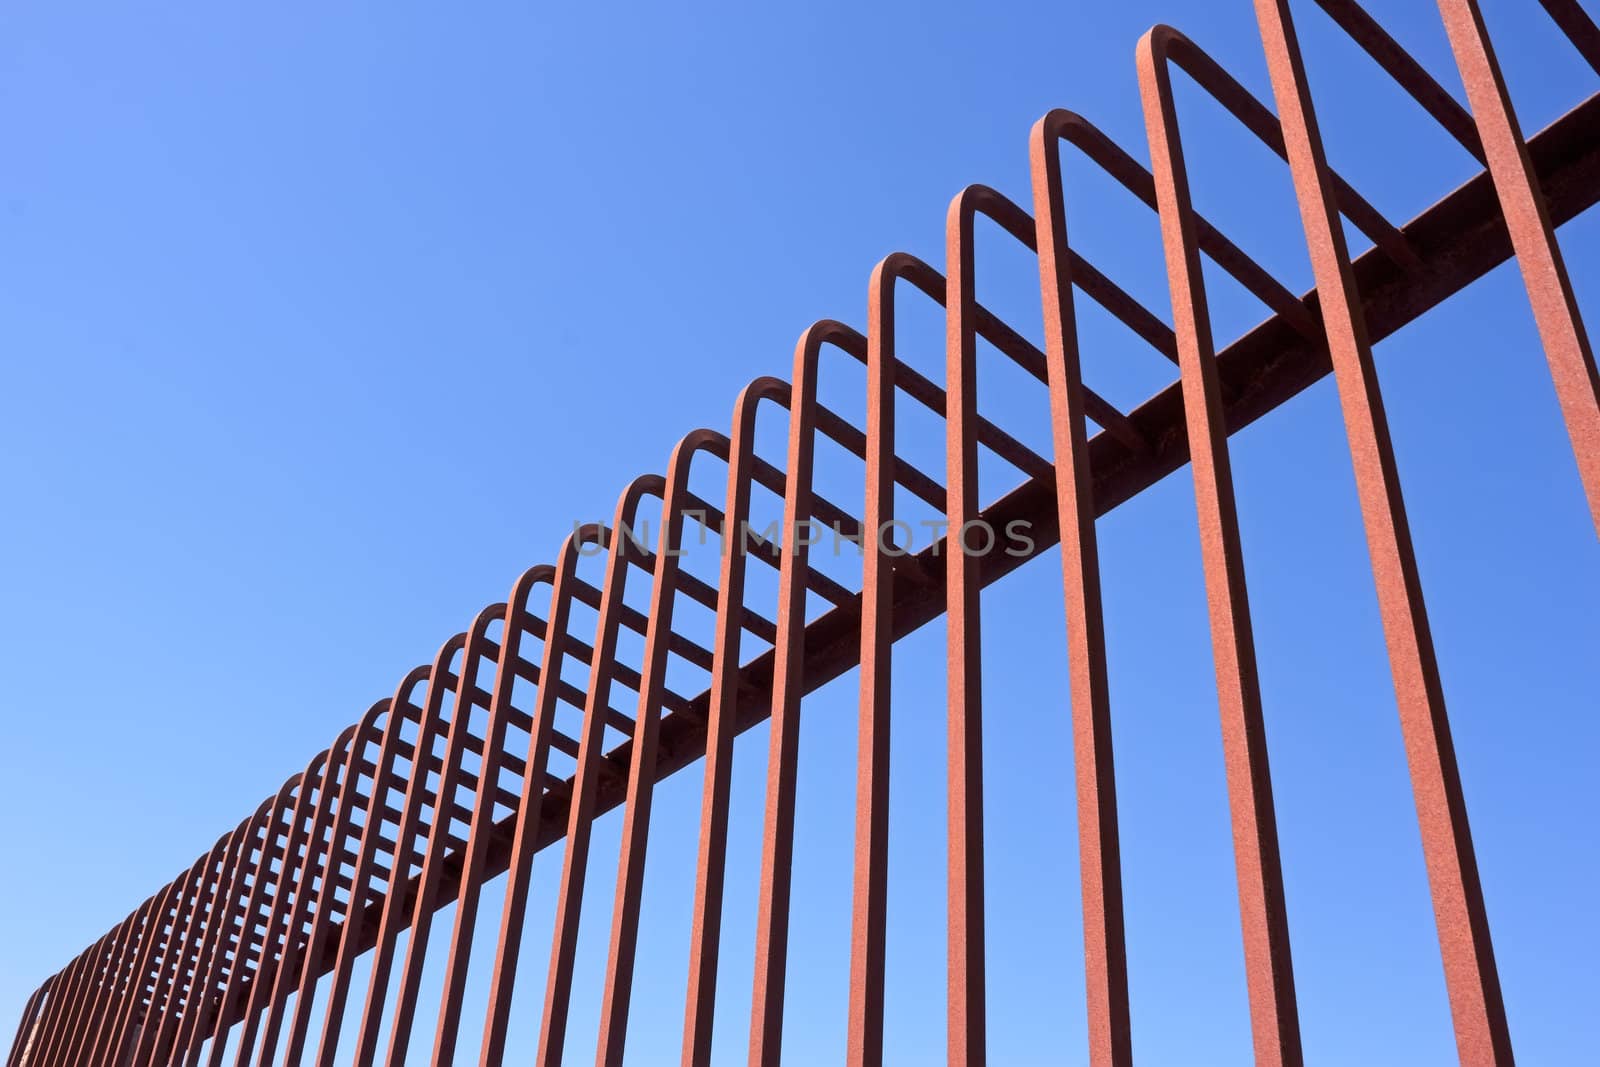 Fragment of fence with bent metal rods against a blue sky